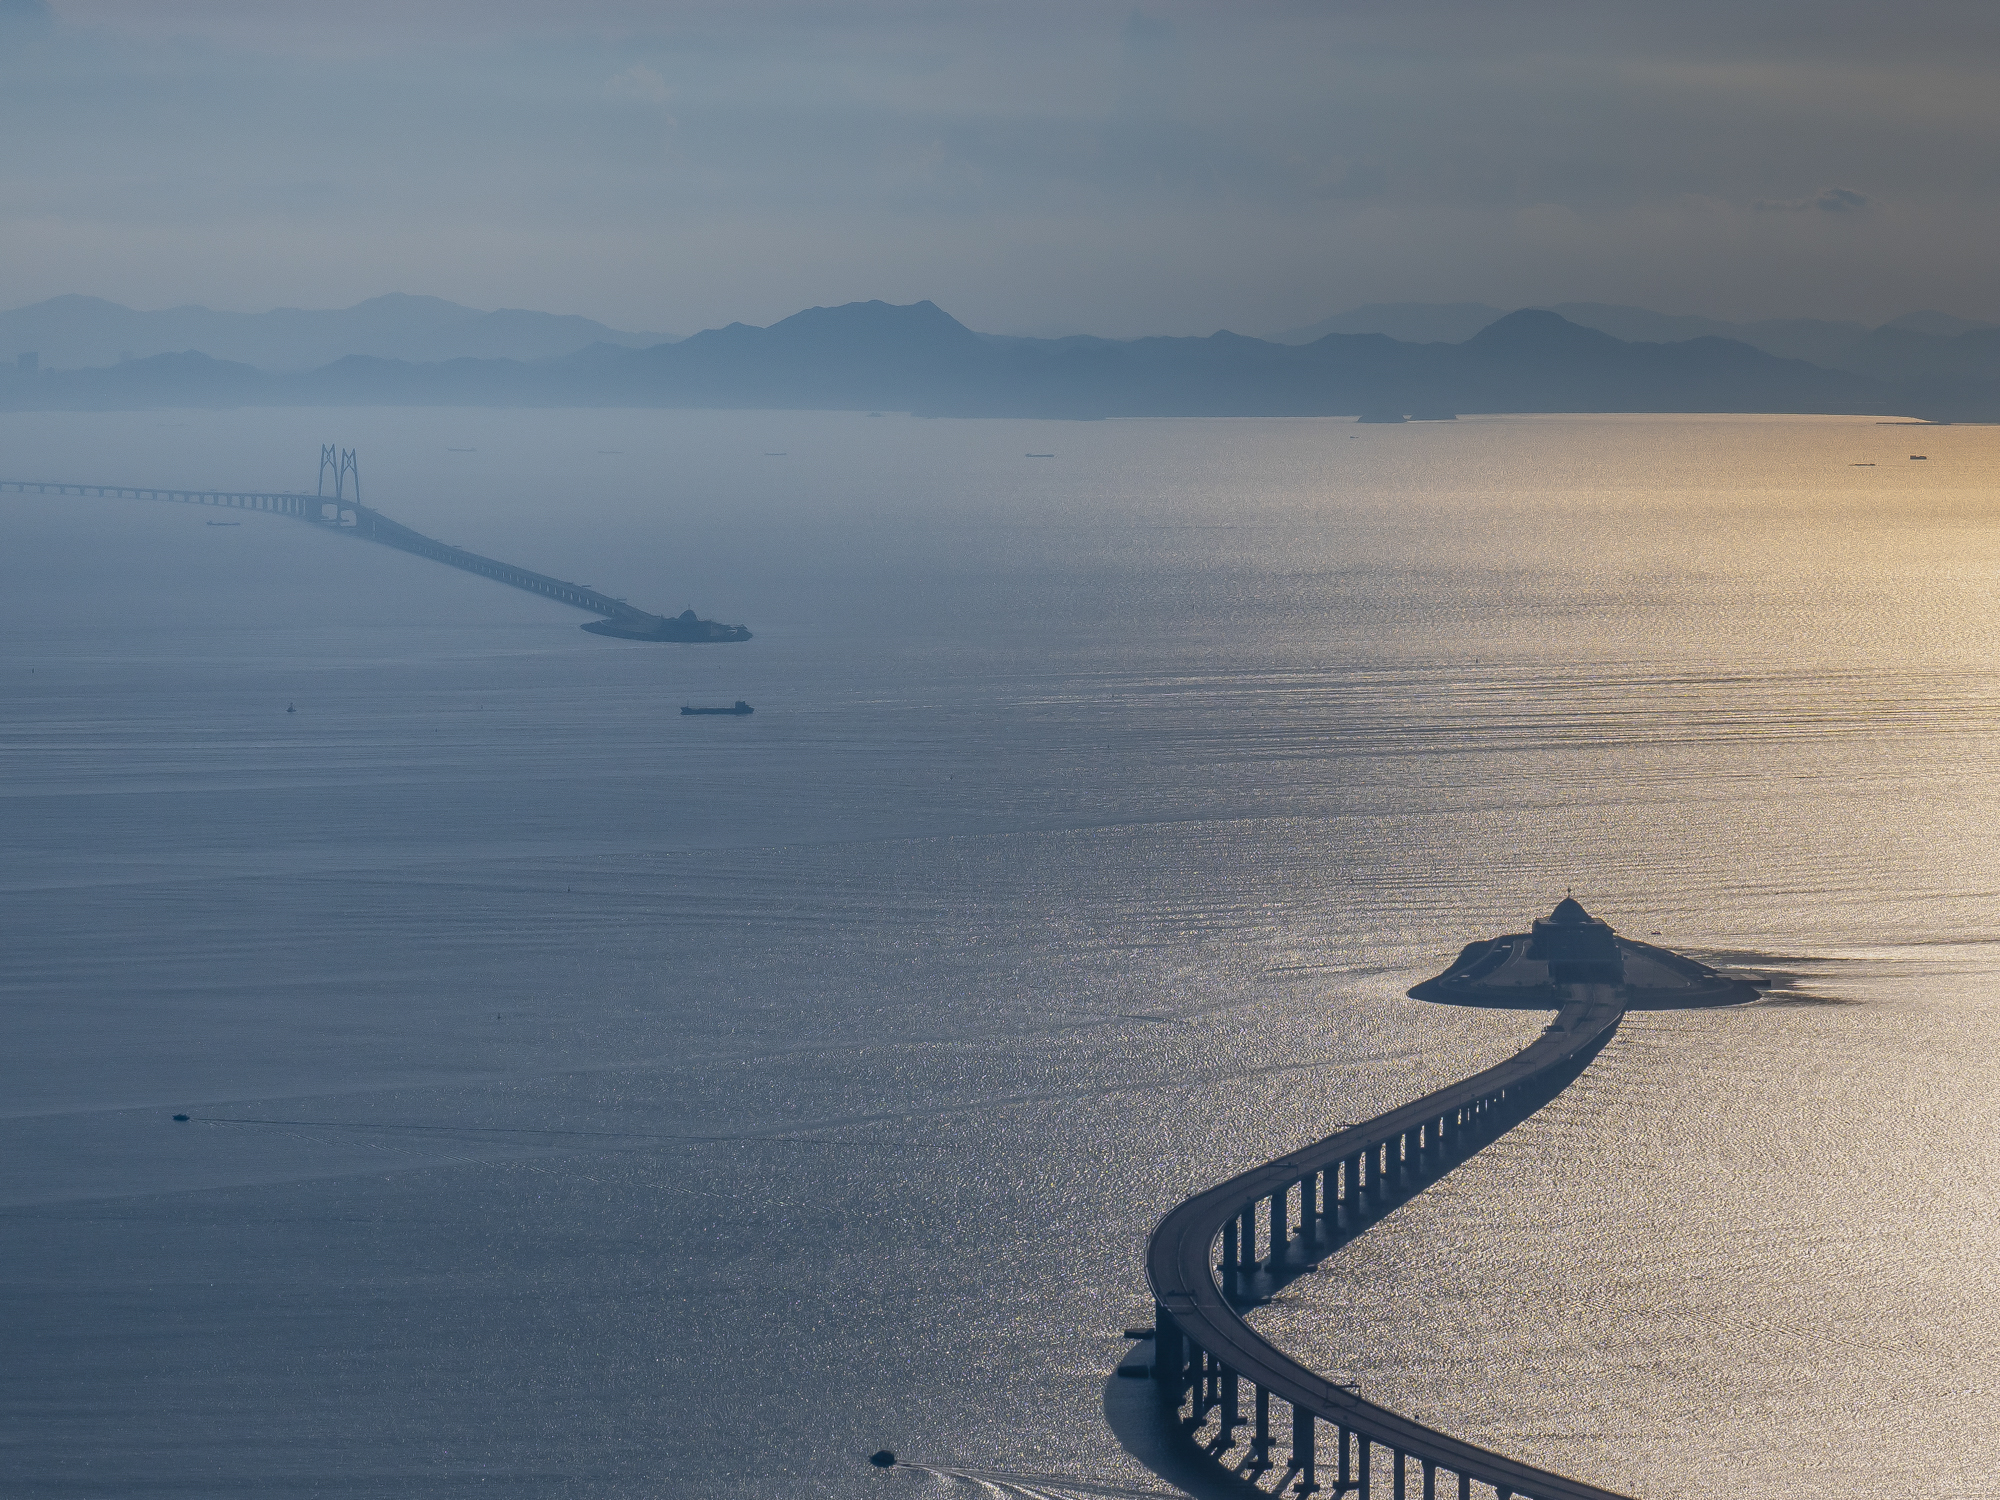 The Hong Kong-Zhuhai-Macau Bridge, a bridge and tunnel system linking Hong Kong, Macau, and mainland China, pictured in August 2022. The bridge was opened in October 2018.